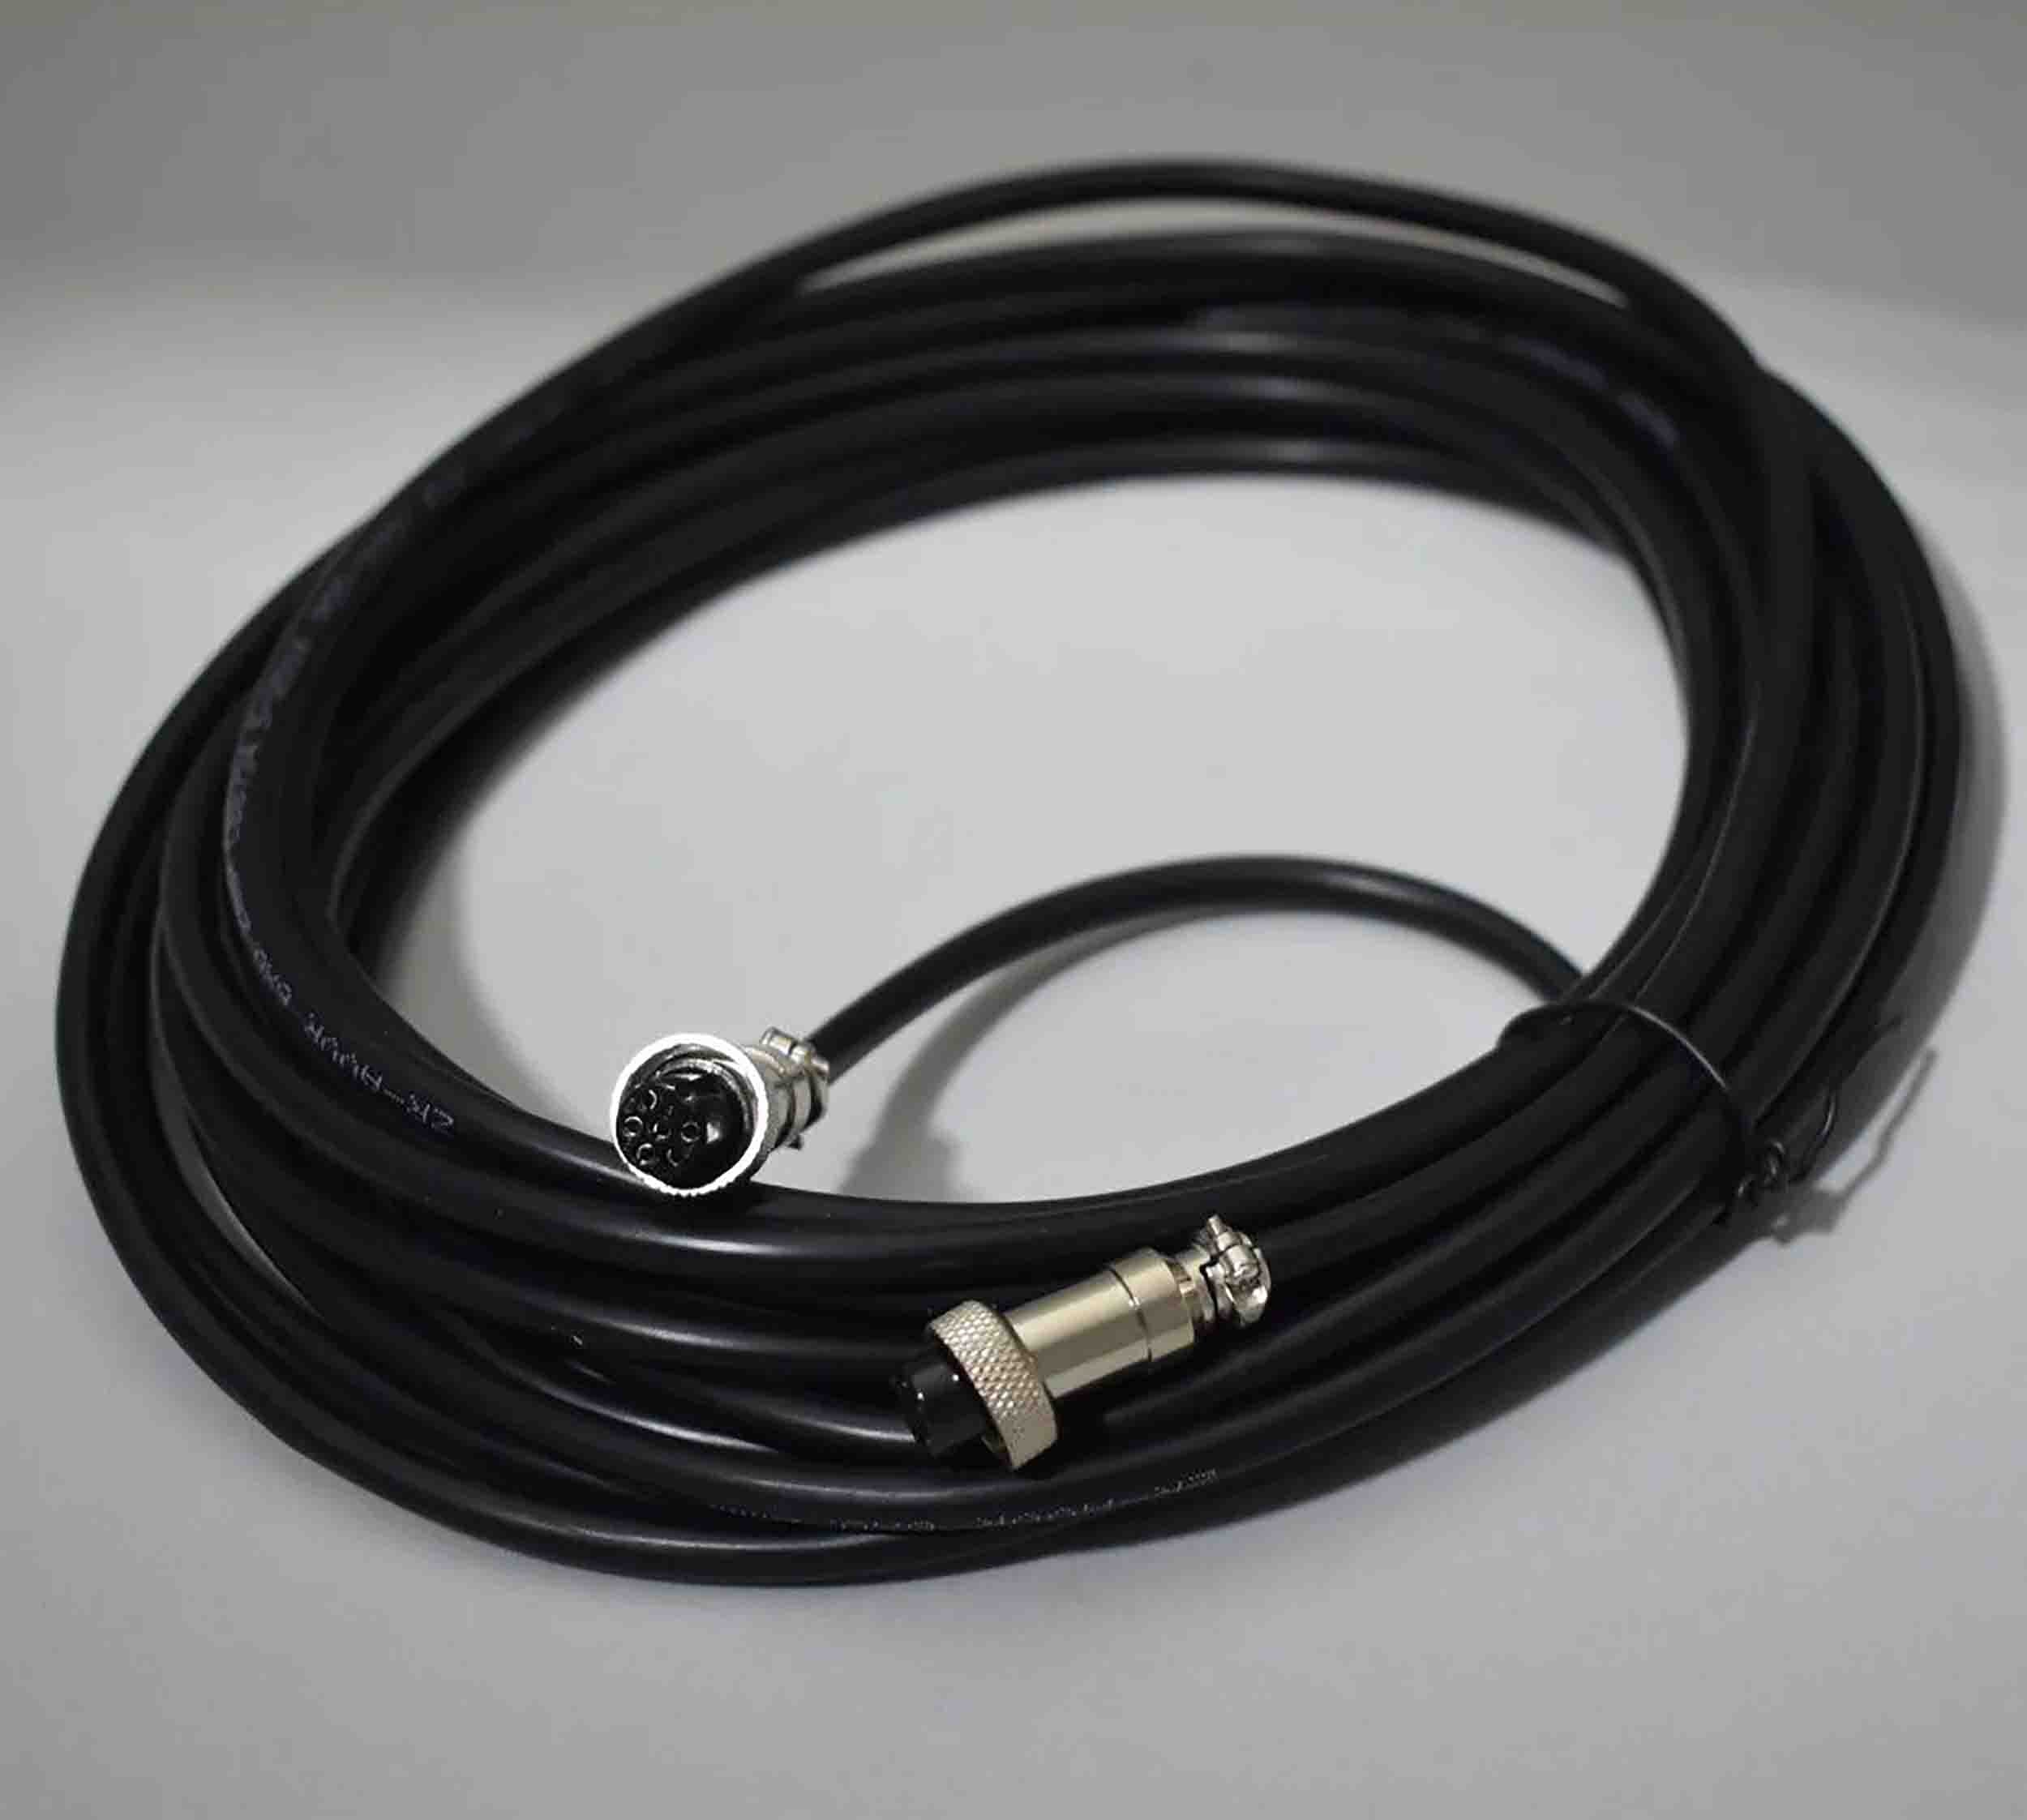 X-Laser 100-357 E-Stop Cable for LaserCube Models - 10 Ft - Hollywood DJ